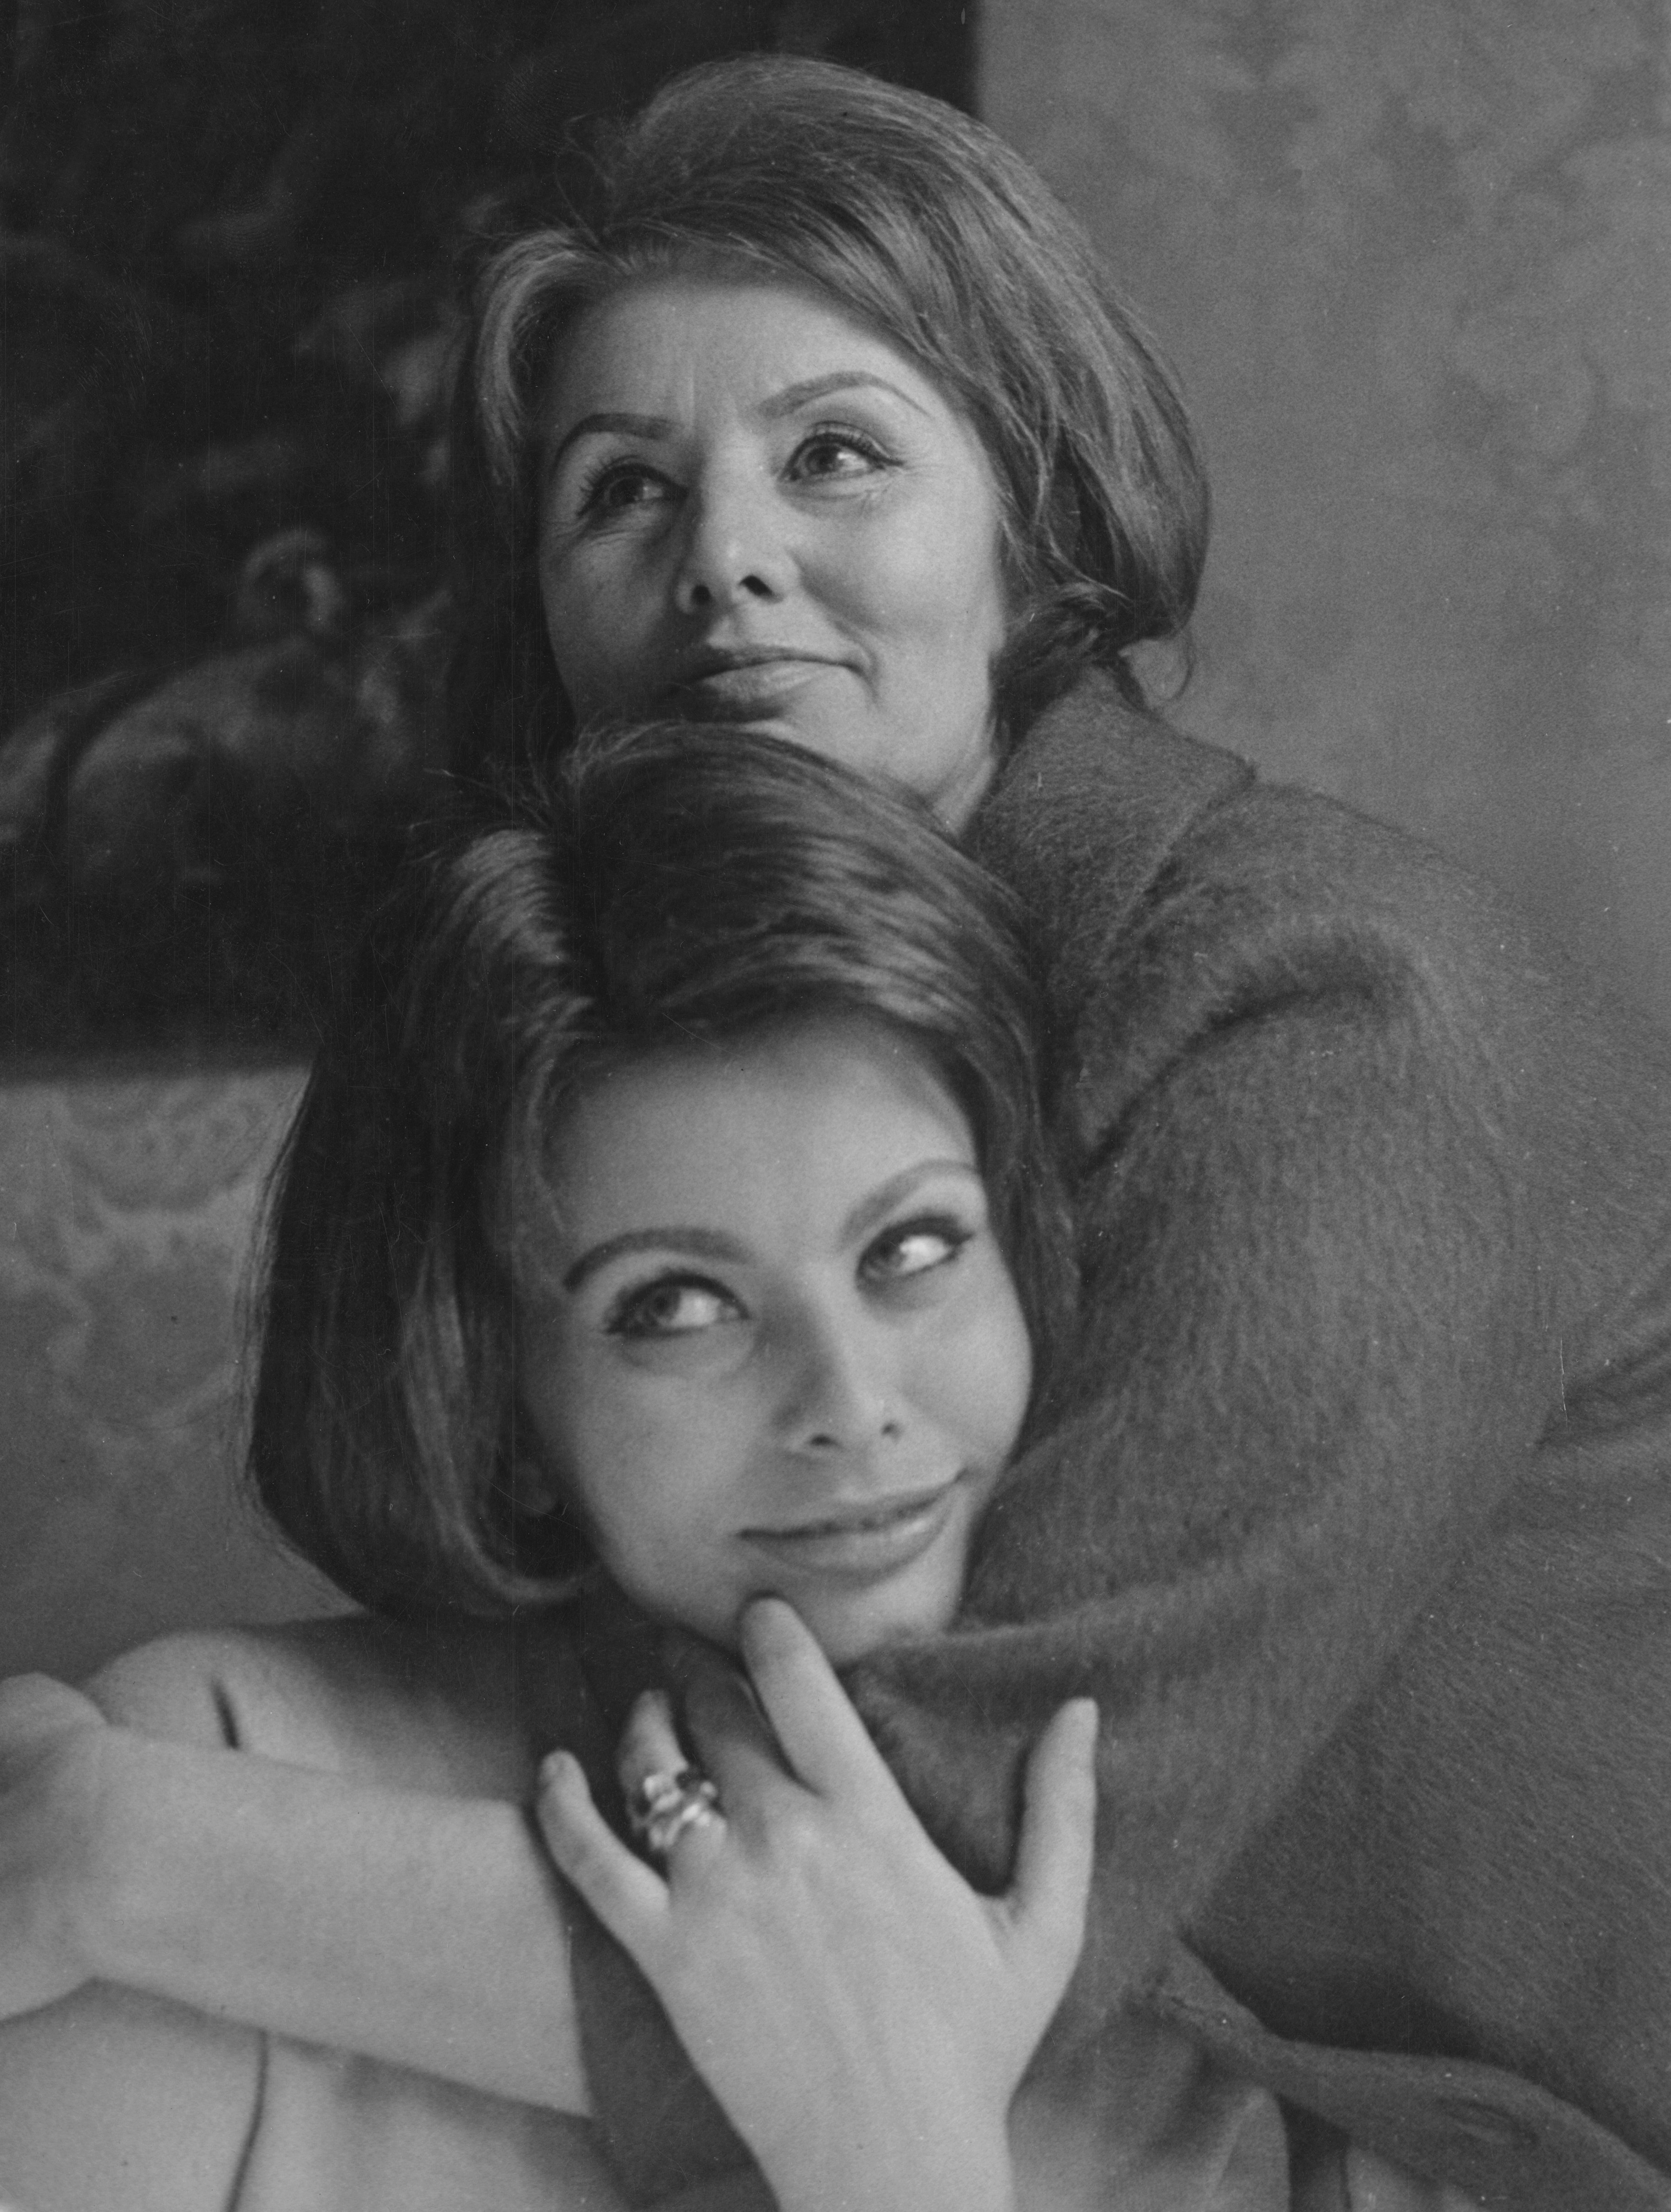 Italian actress Sophia Loren and her mom Romilda Villani in Rome, Italy, on 12th April 1962. | Source: Getty Images